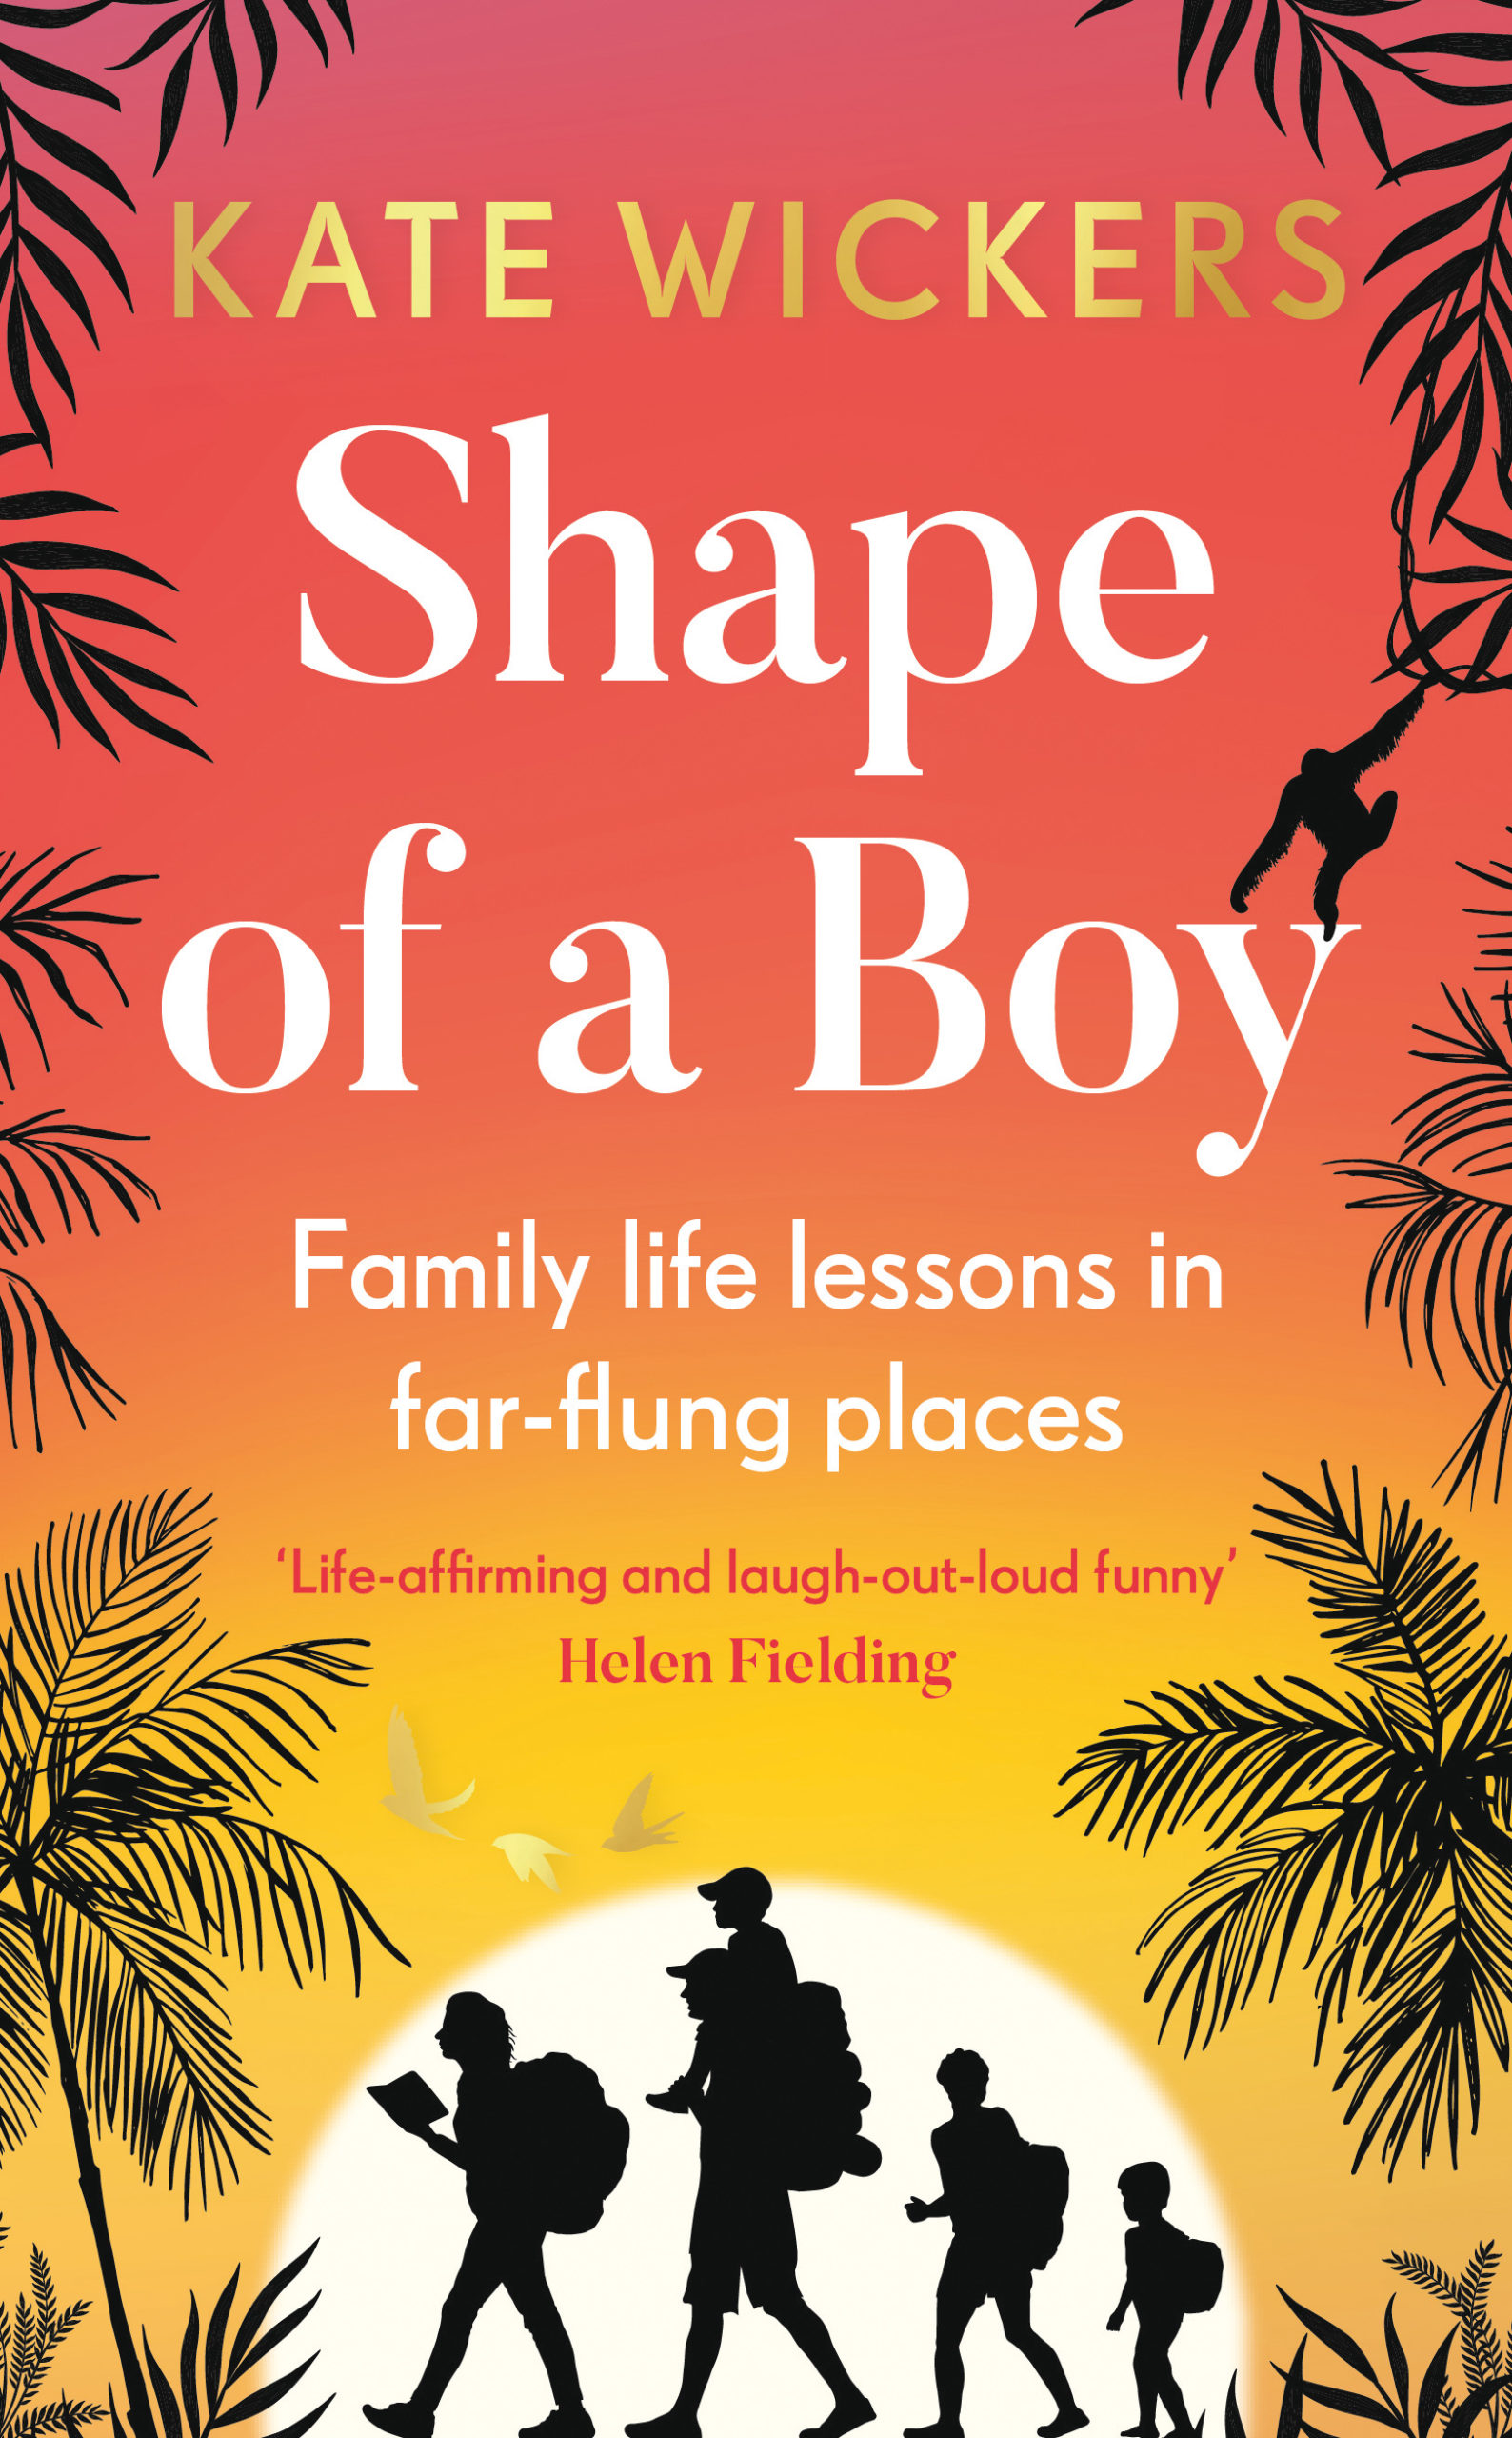 front-cover-of-shape-of-a-boy-travel-memoir-by-kate-wickers-2022